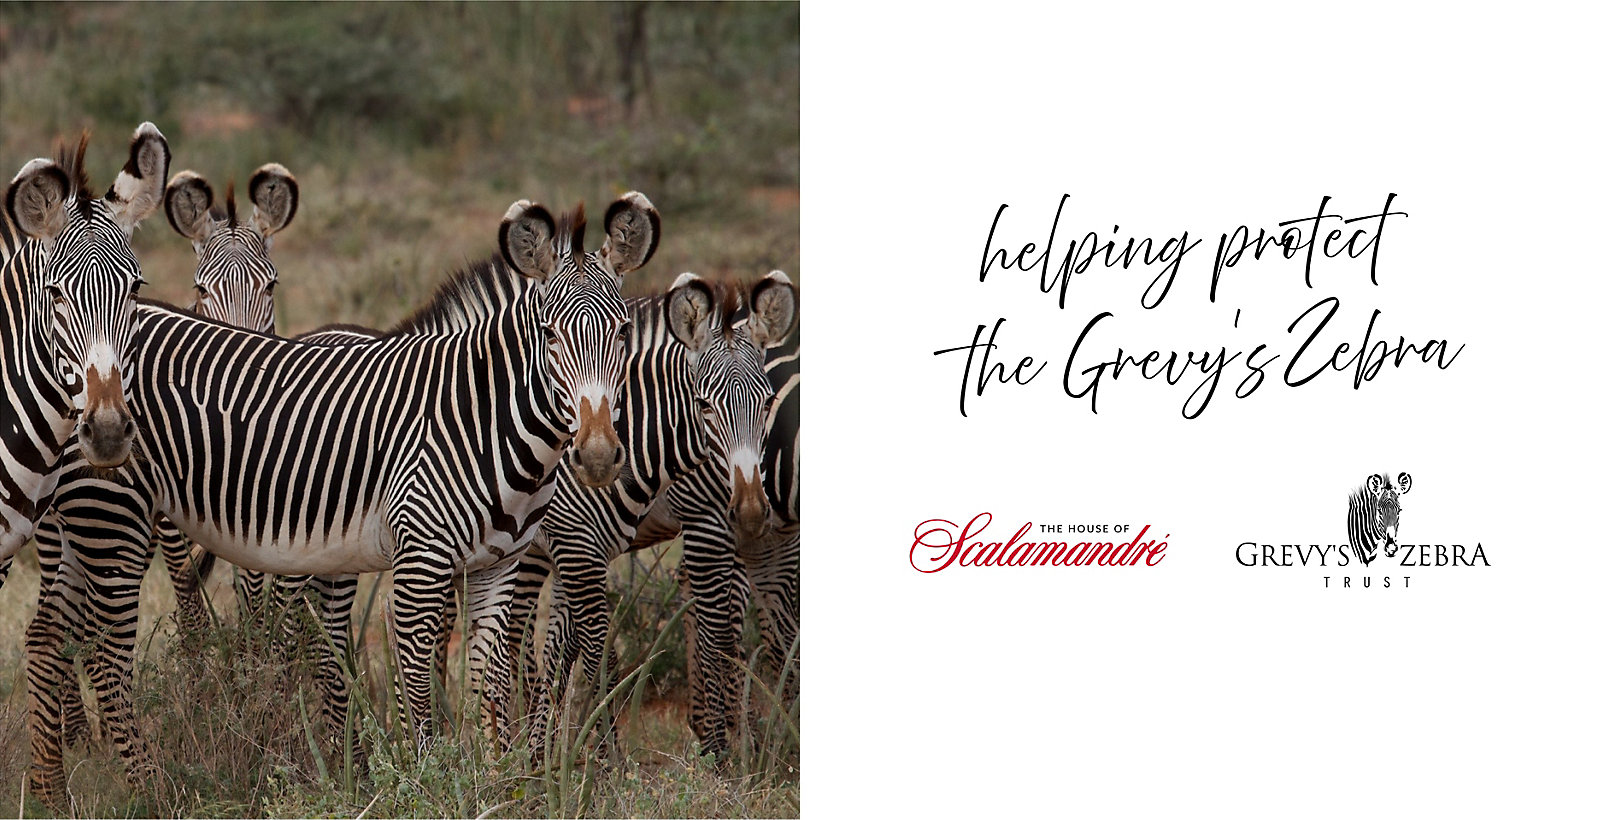 Helping Protect the Grevy’s Zebra